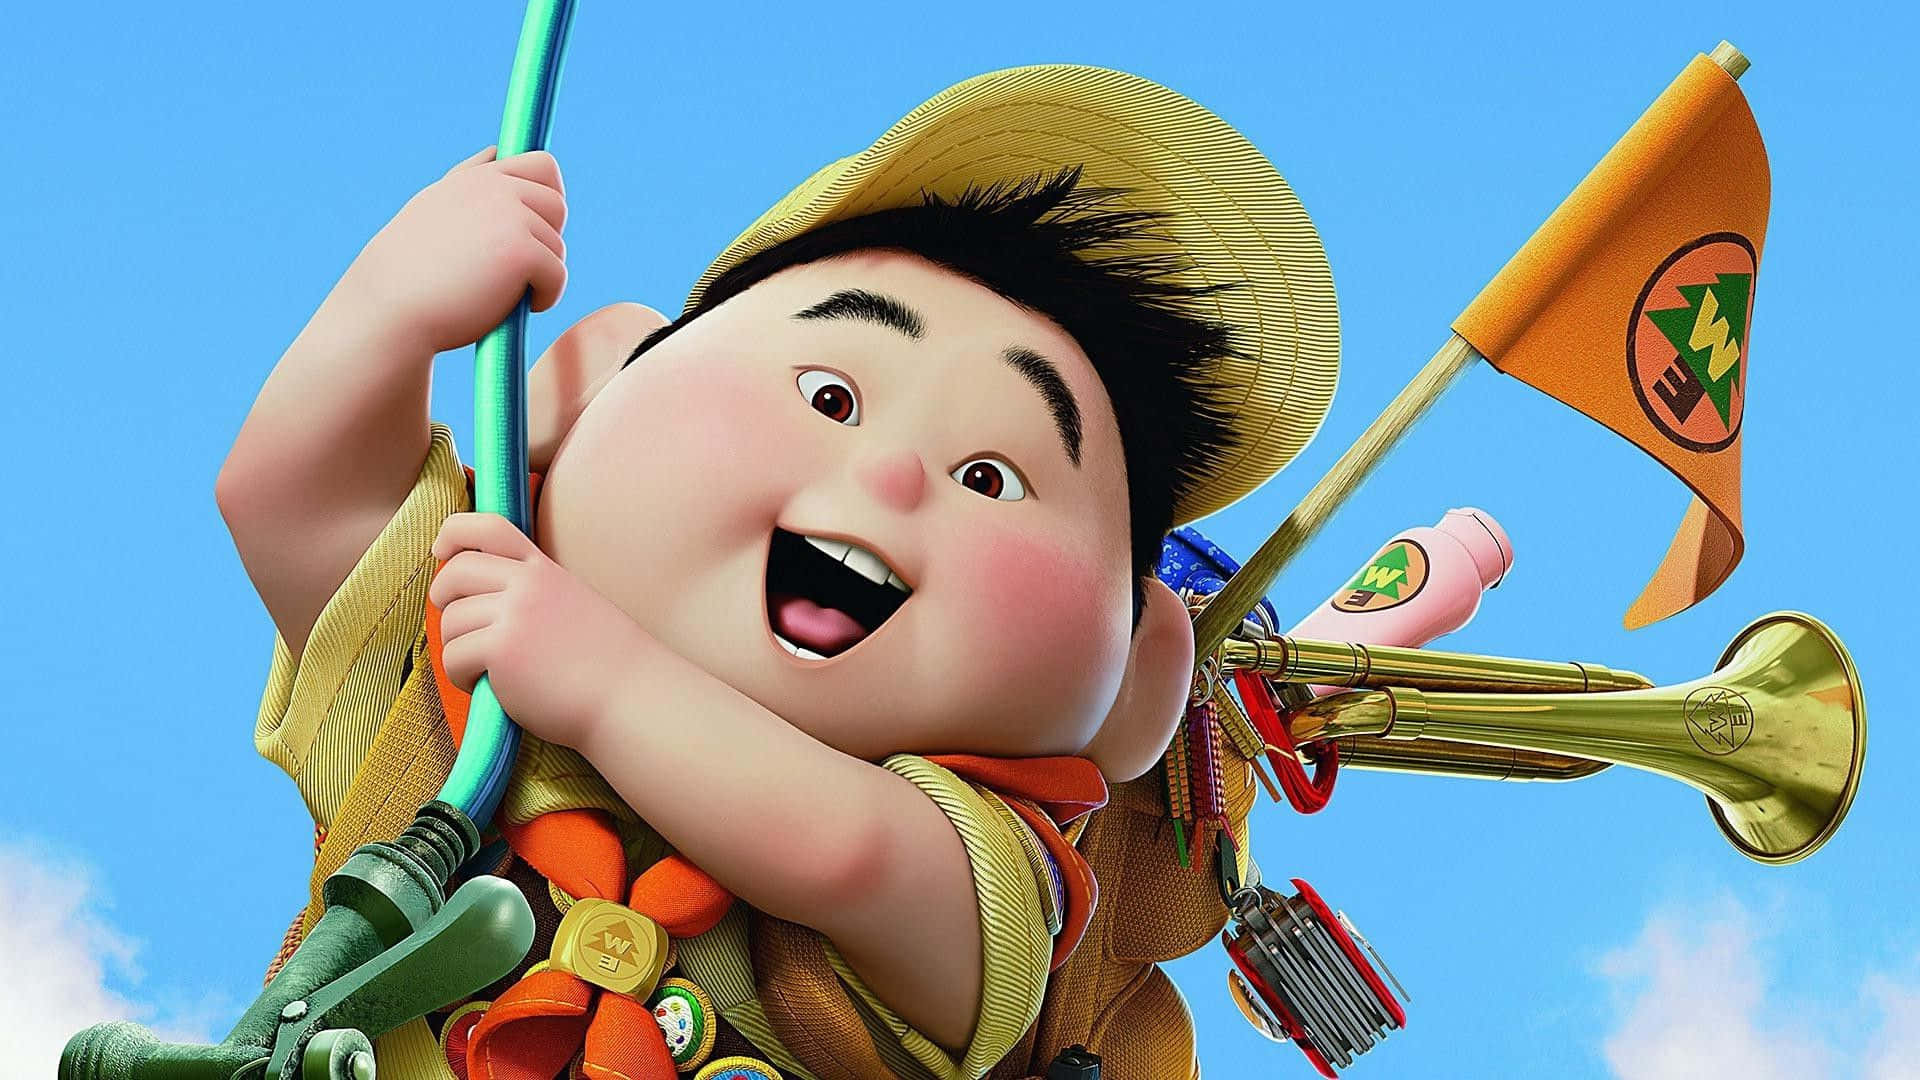 Cute Russel Holding Water Hose In Up Movie Wallpaper